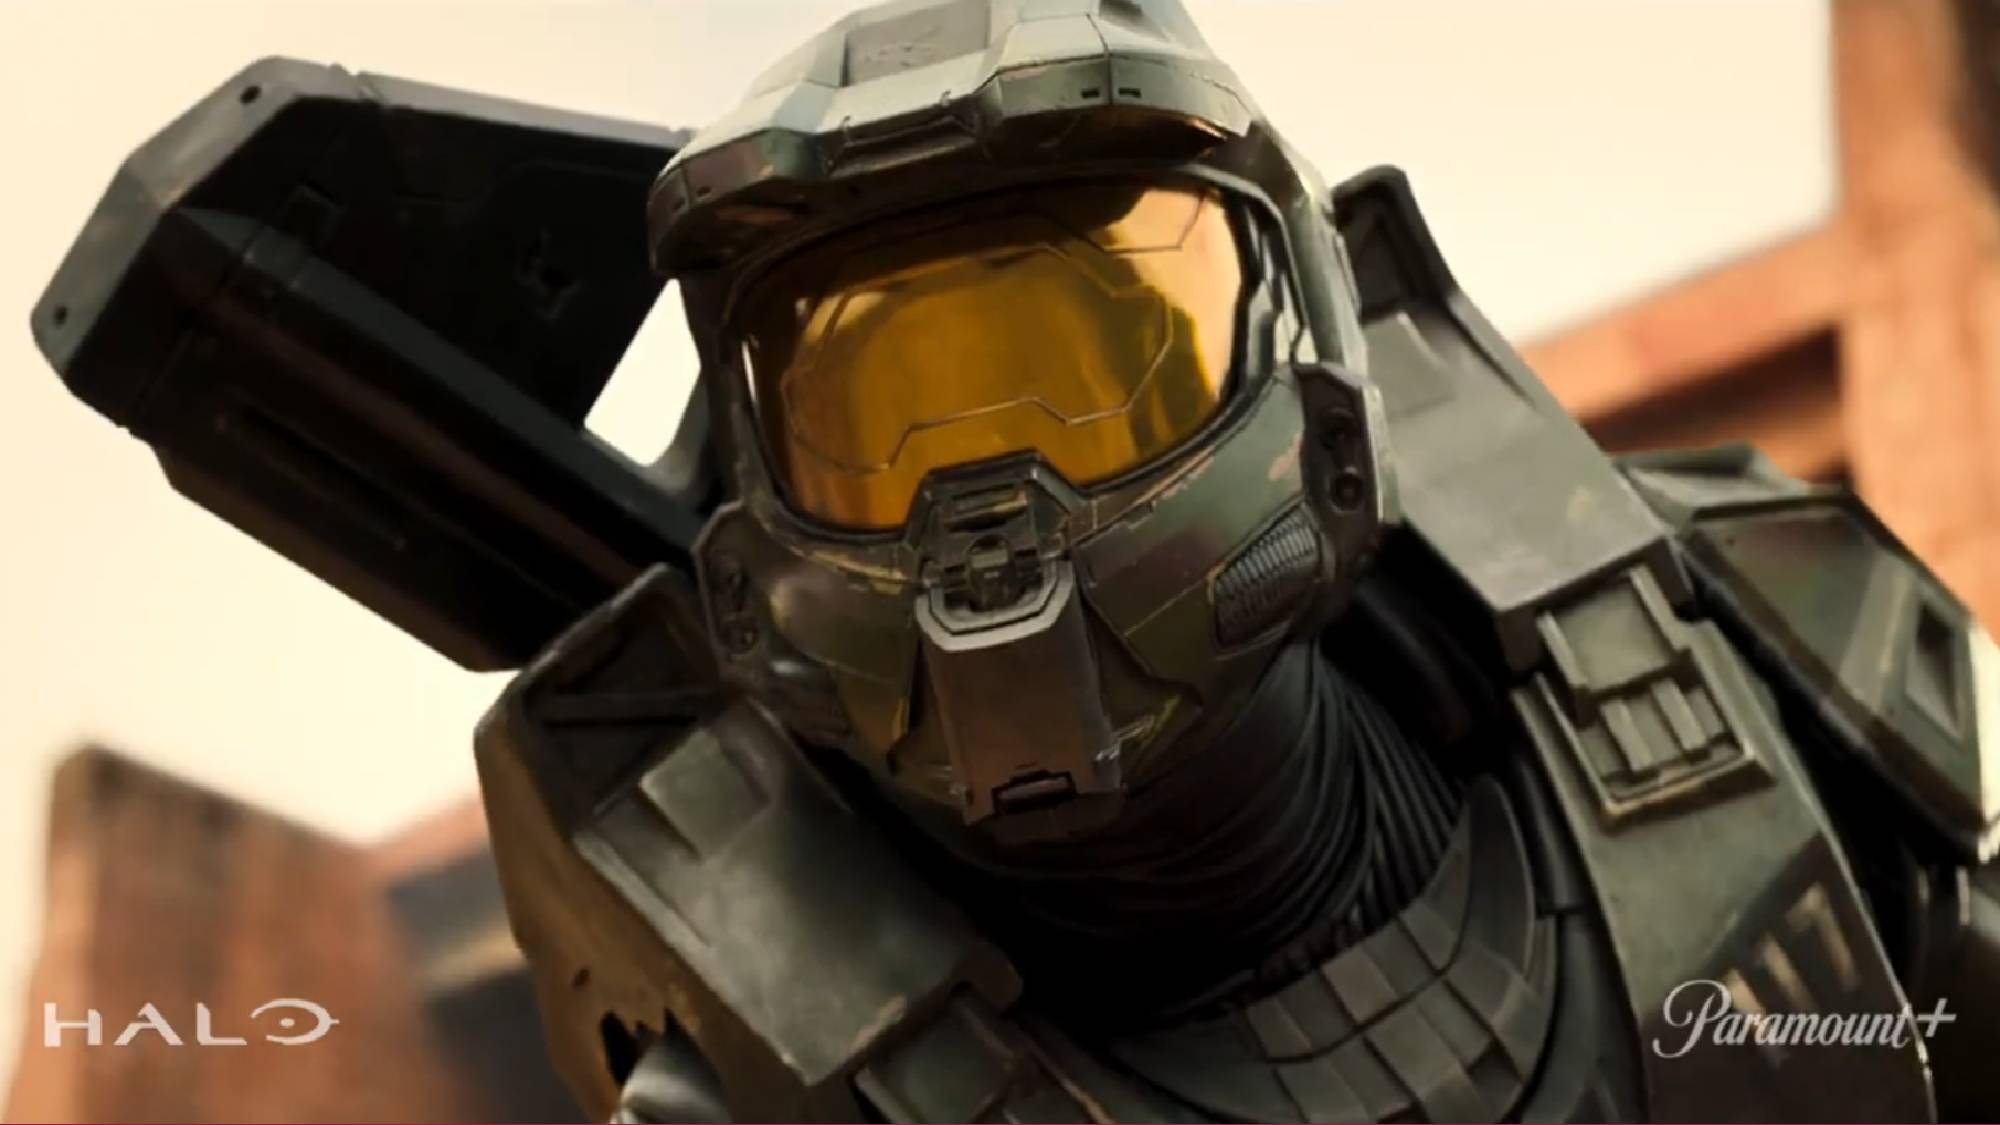 Halo TV show release date, trailer, cast and more